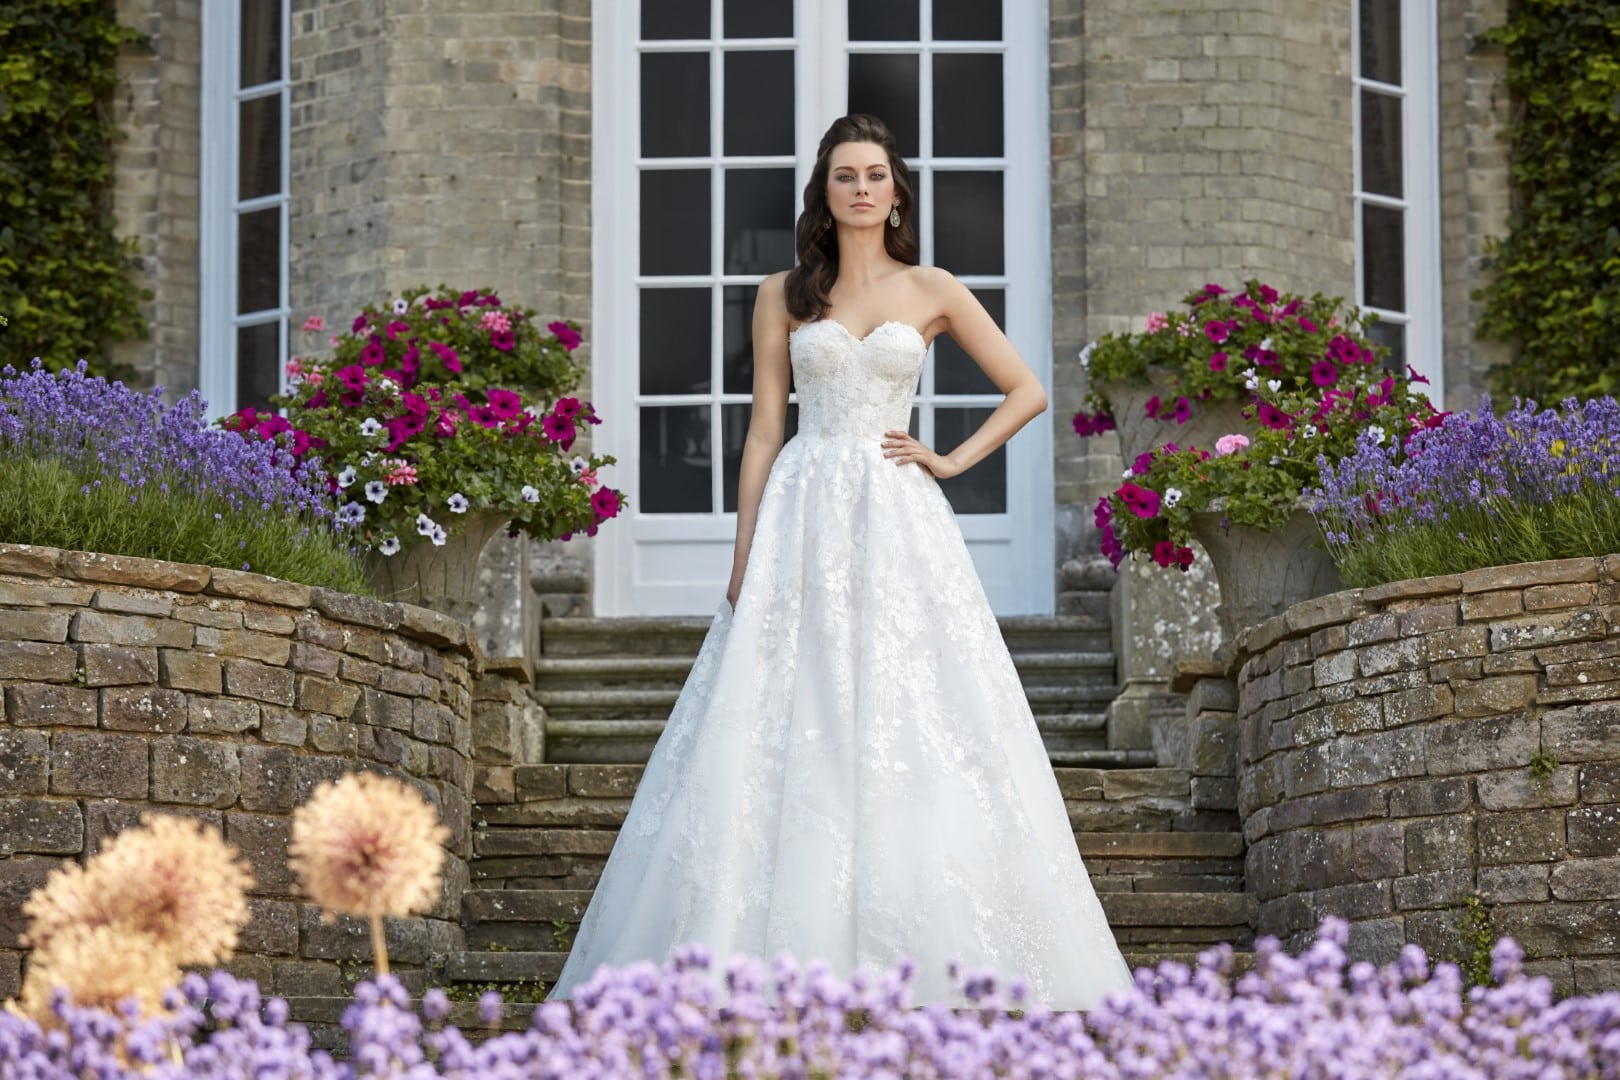 Classic meets contemporary, the Caroline Castigliano Amber bridal gown is a luxury bridal design at its best. Find your perfect wedding dress at Your Dream Bridal near Boston.